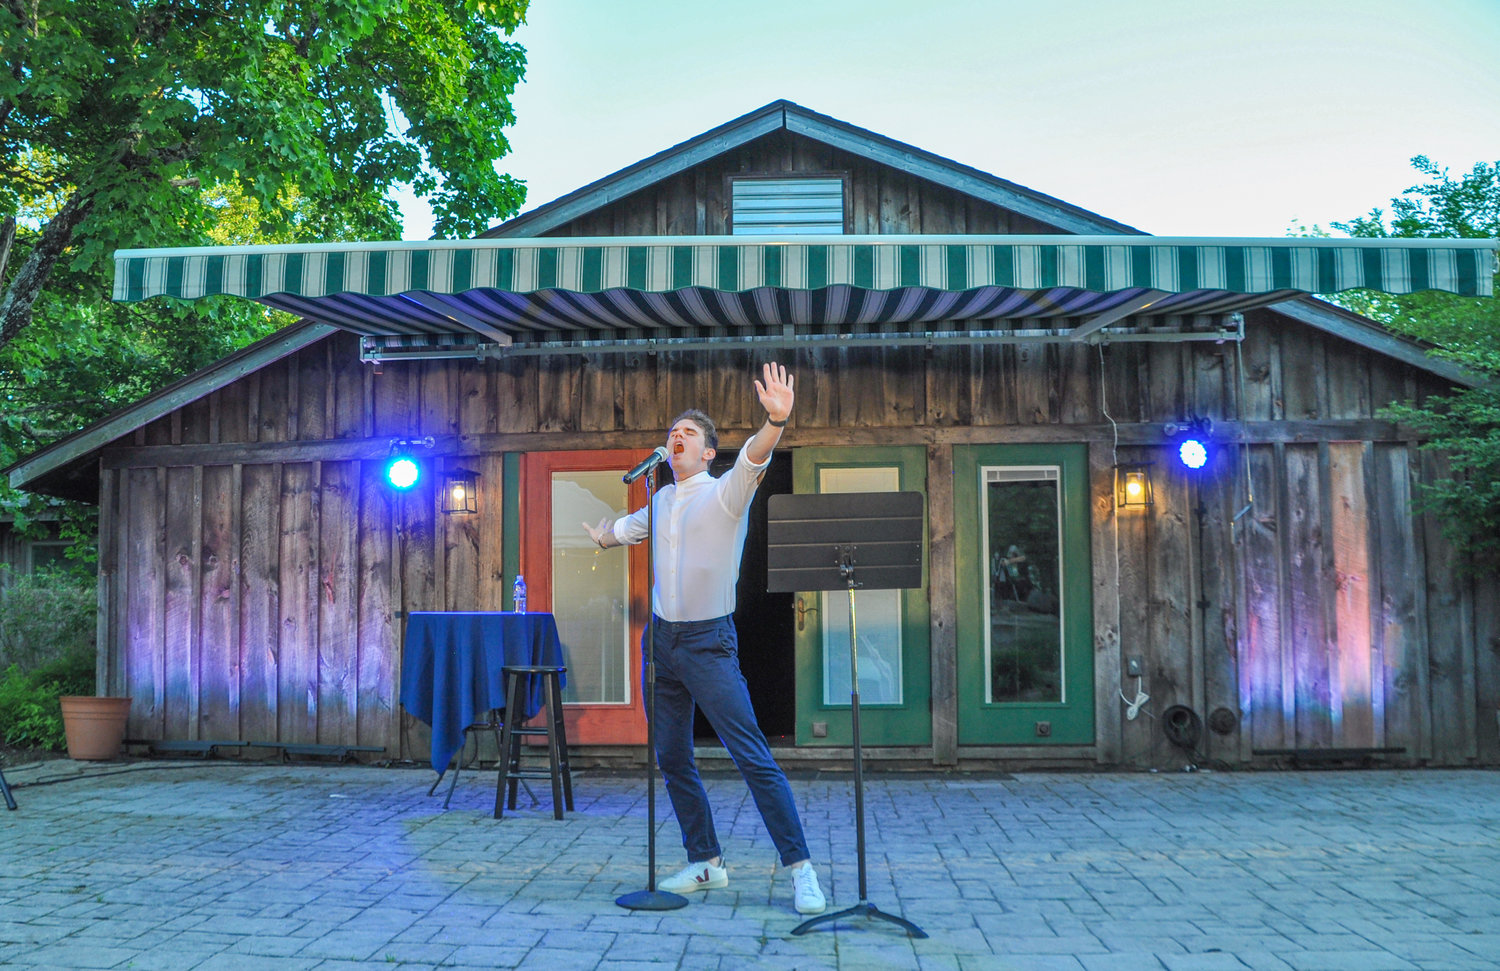 Like the proverbial Energizer Bunny, Jay Armstrong Johnson careened across the outdoor patio stage at the Forestburgh Playhouse last weekend.